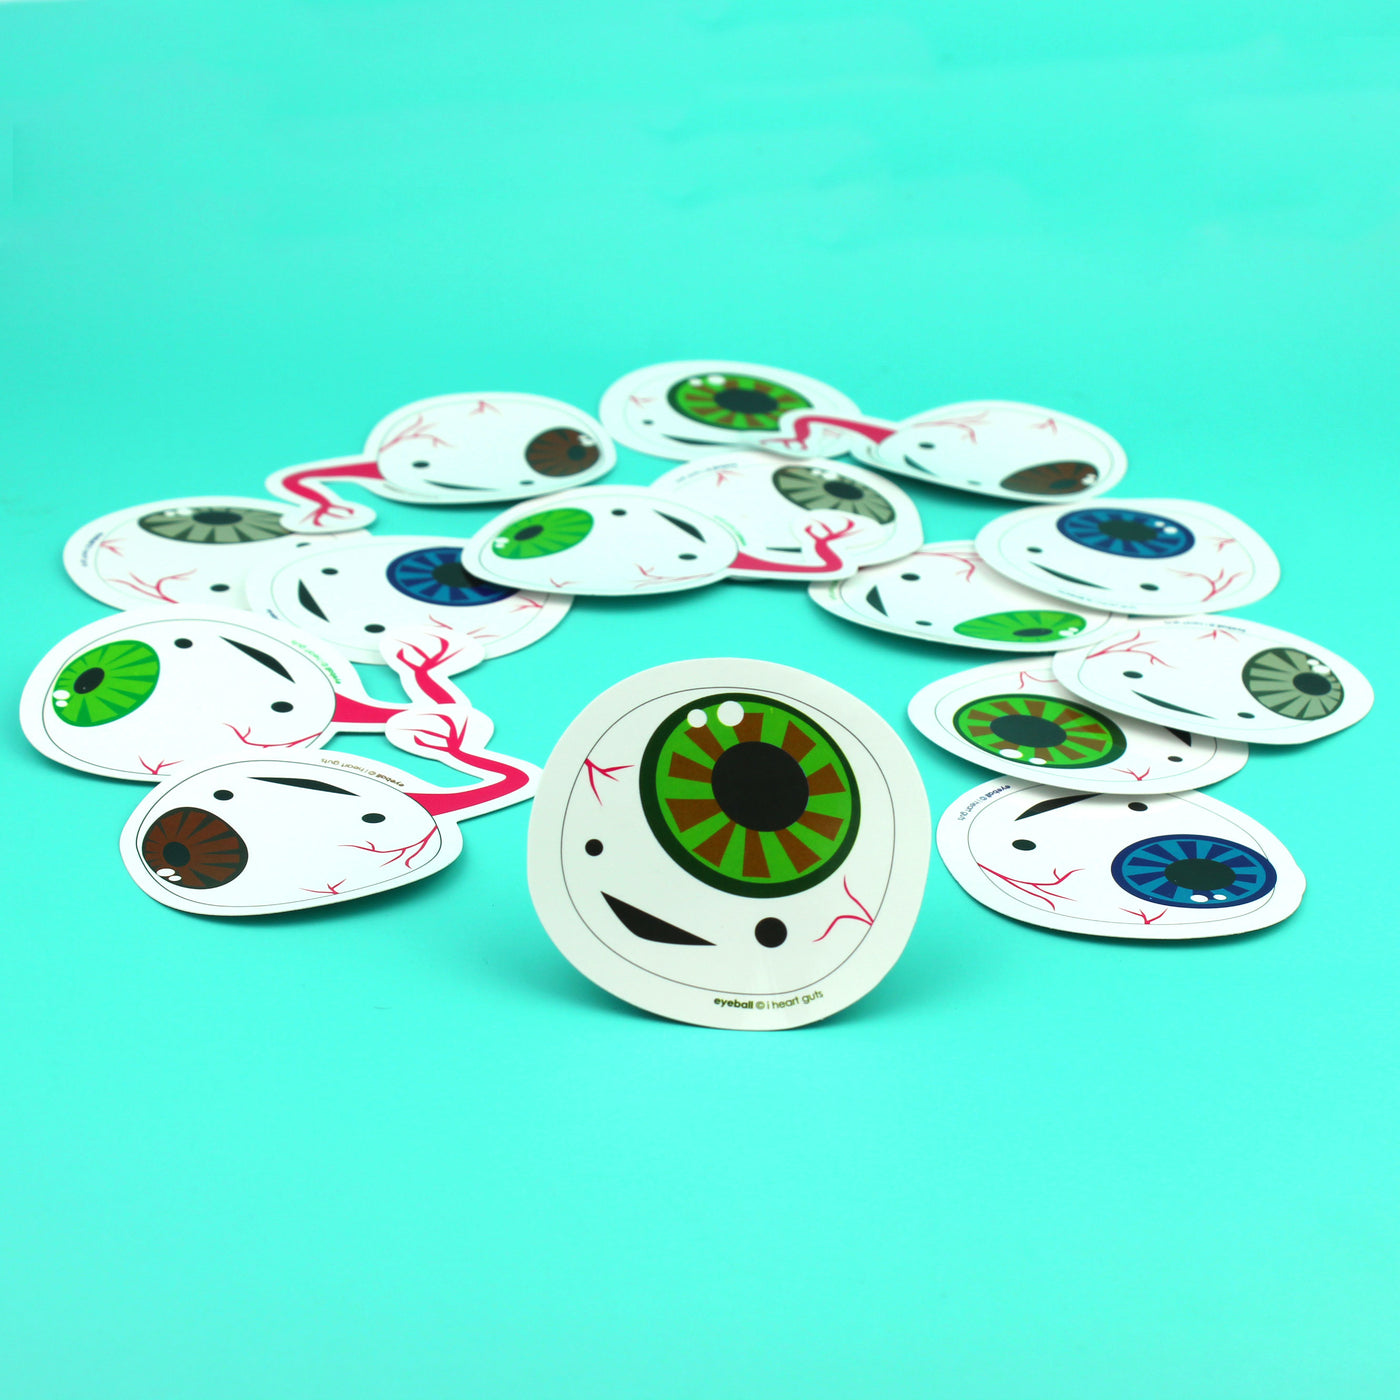 I Only Have Eyeball Stickers For You - 15 Multicolor Eyeball Stickers - I Heart Guts